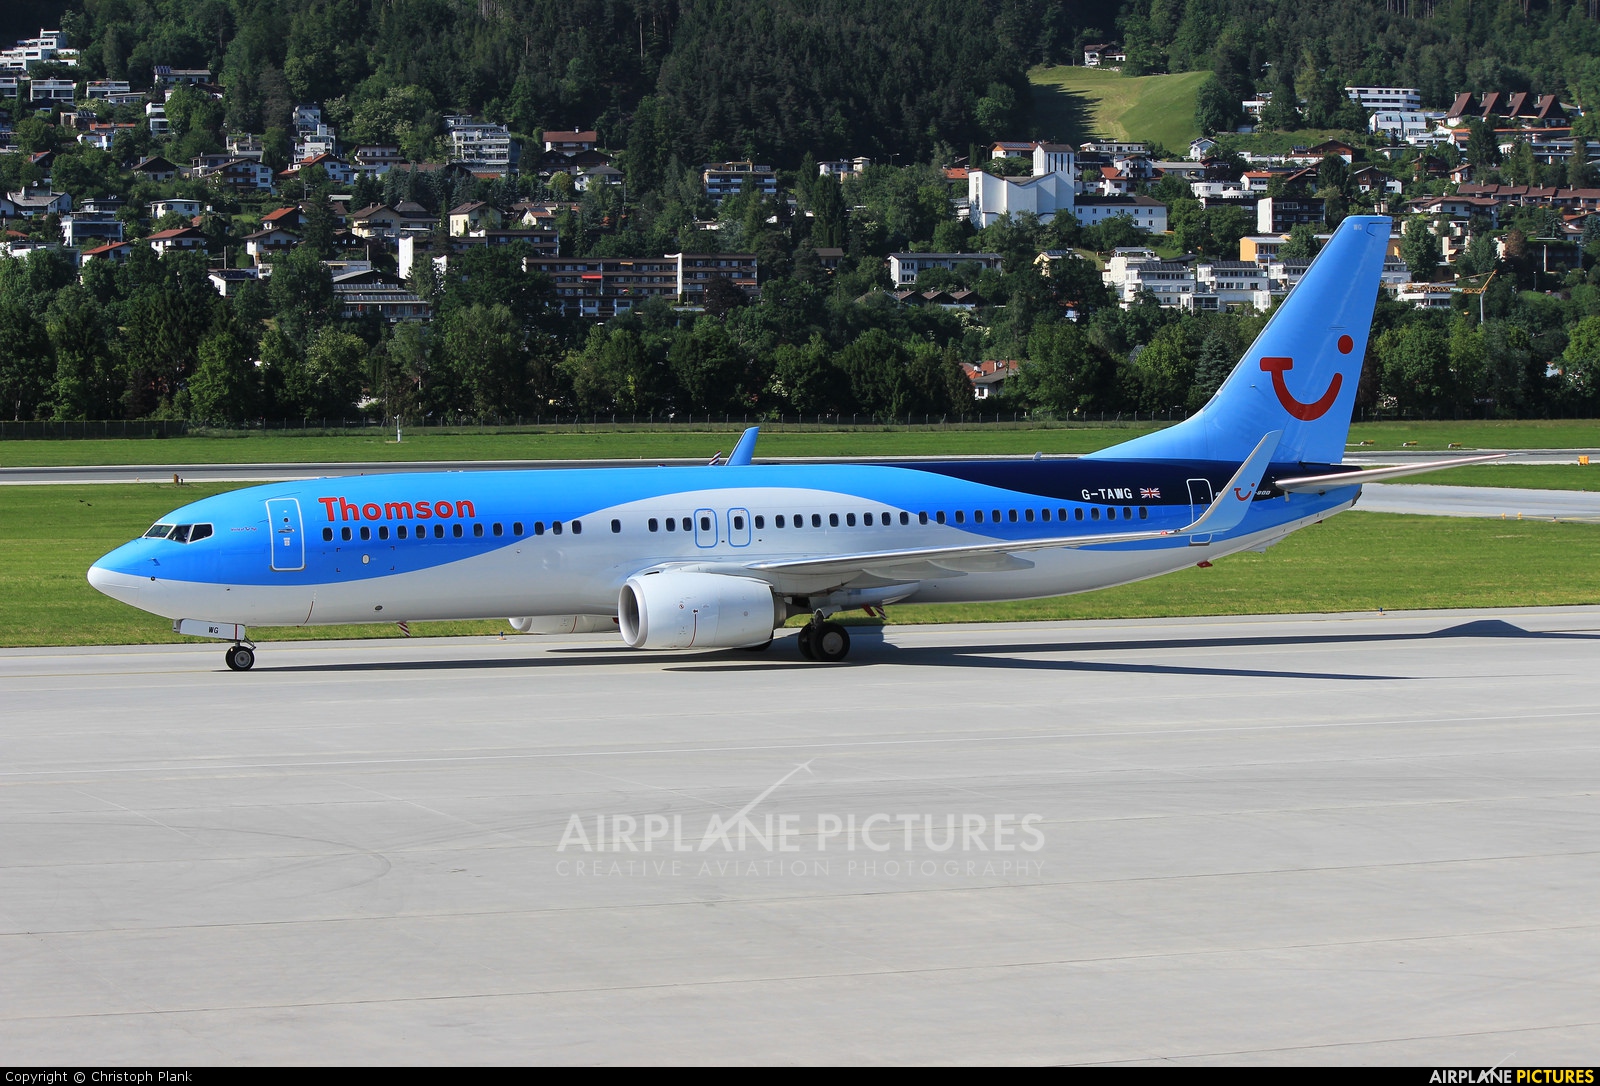 Thomson/Thomsonfly G-TAWG aircraft at Innsbruck